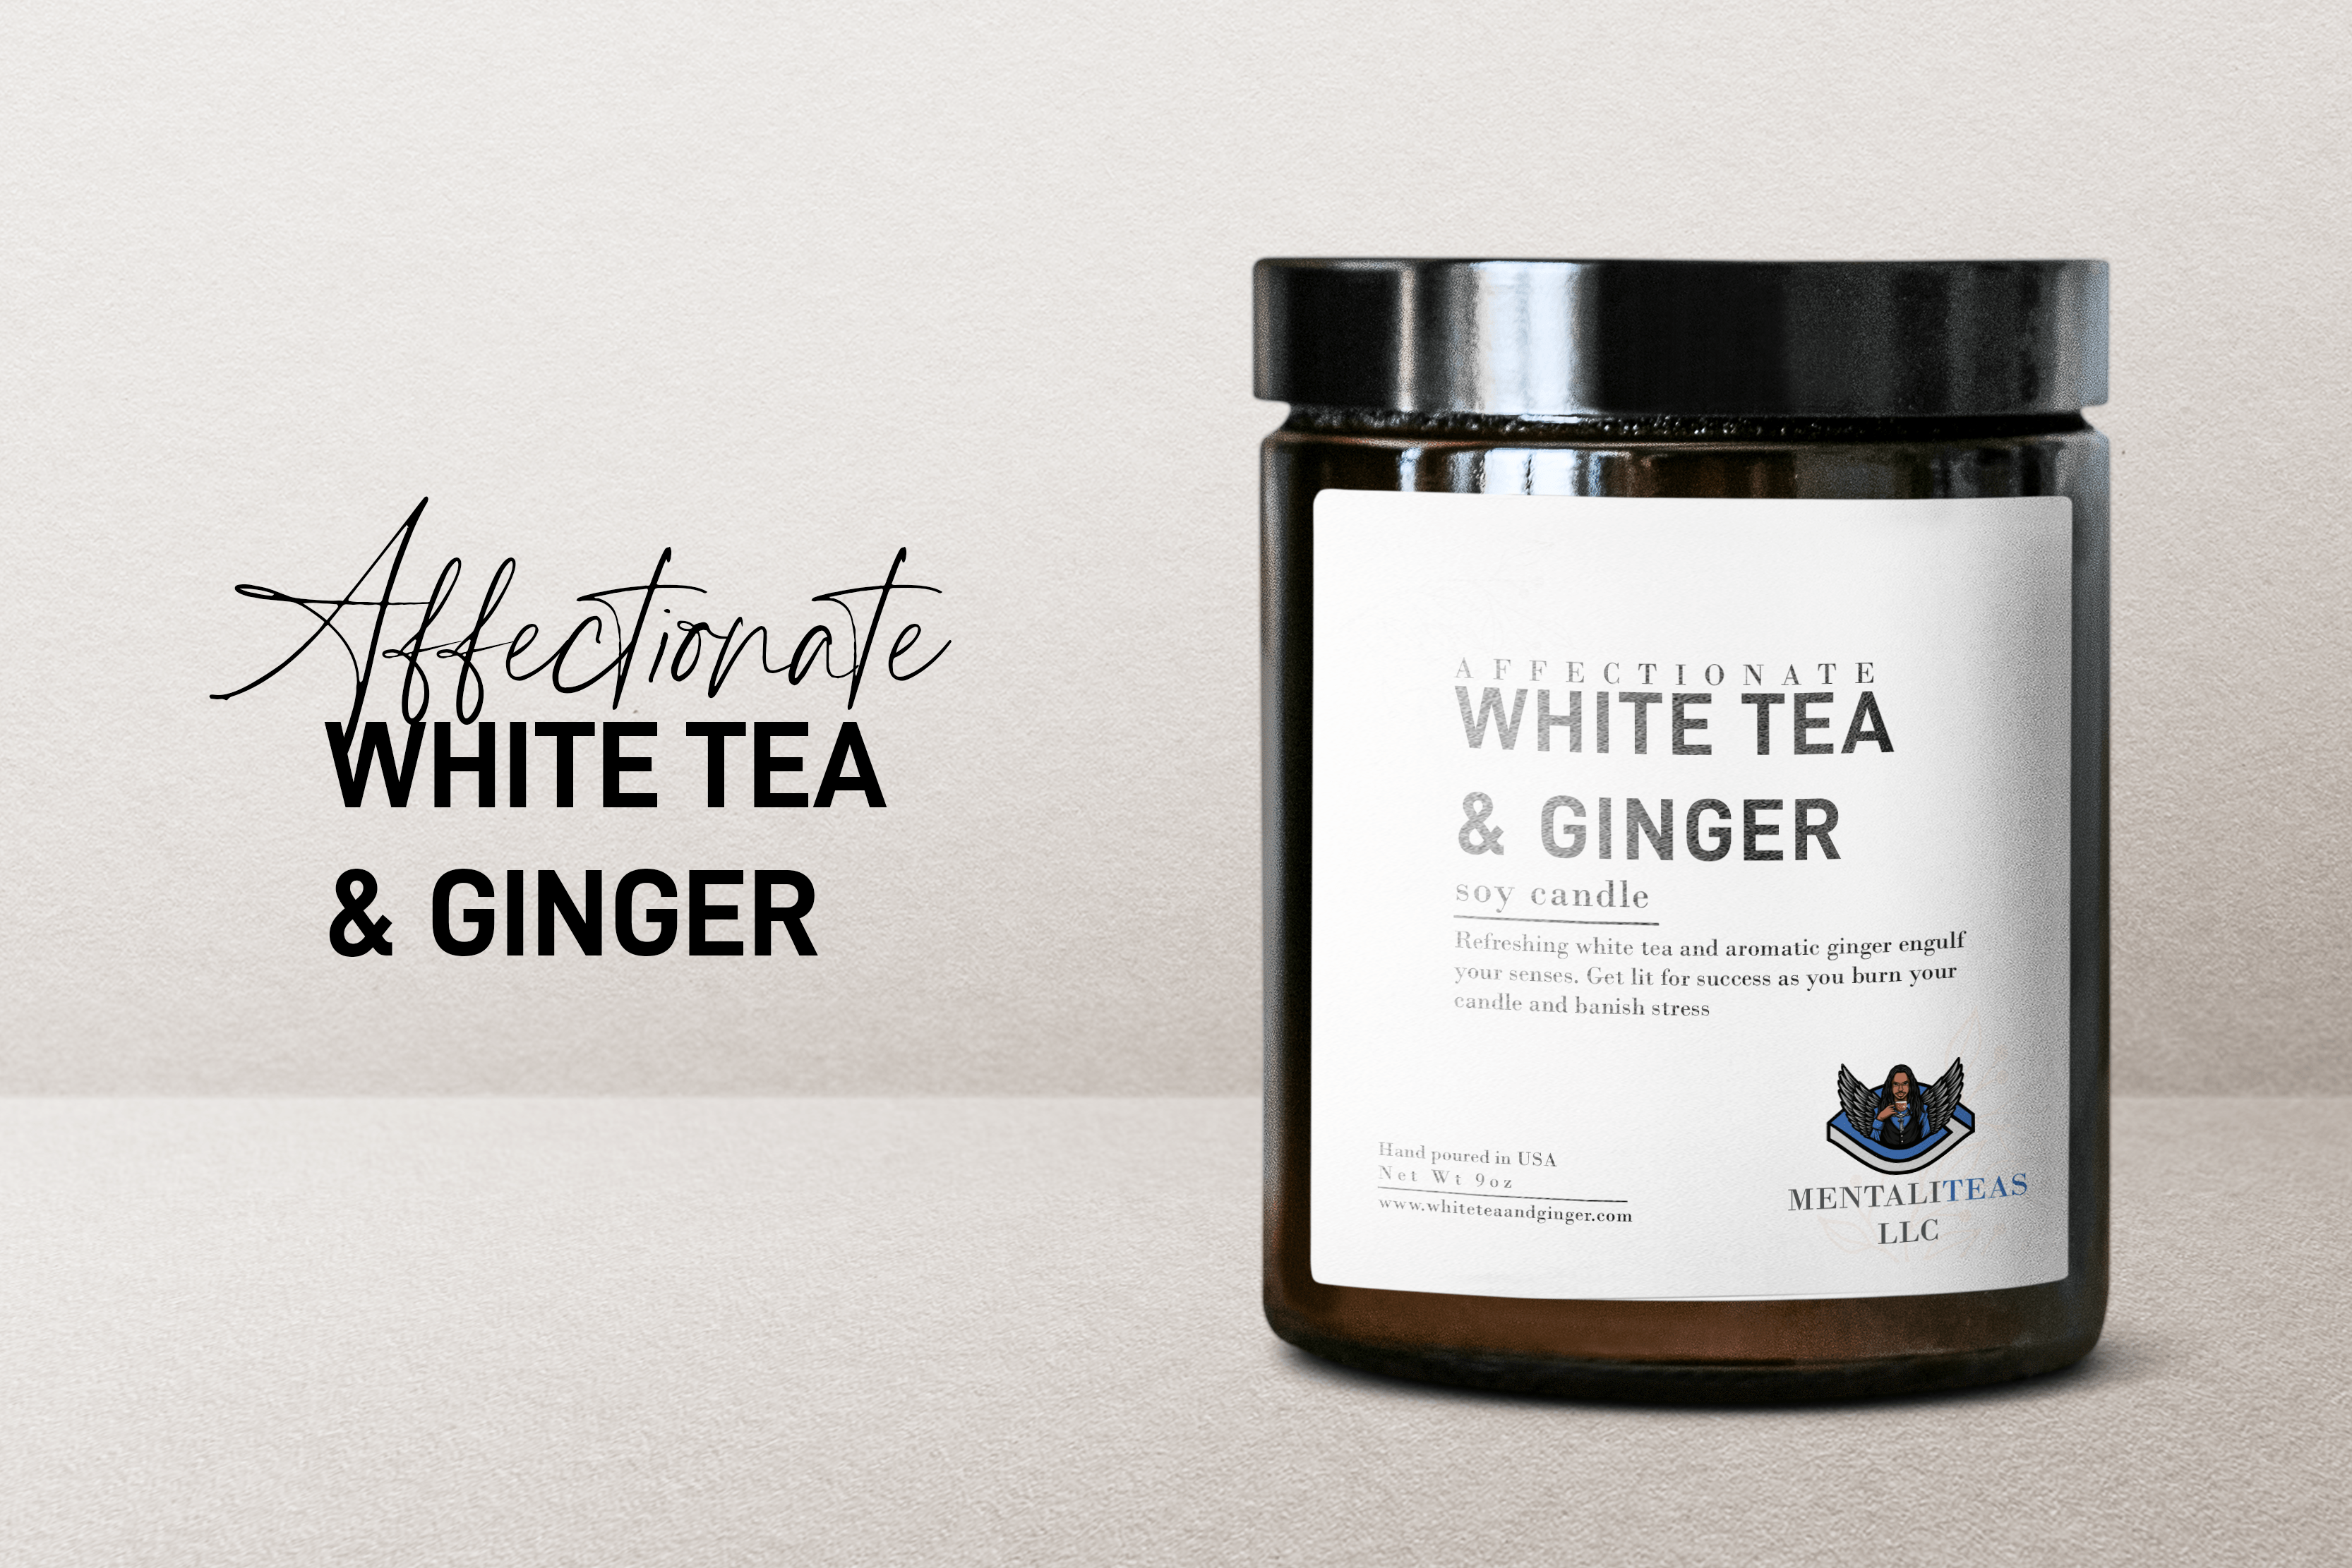 Affectionate White Tea & Ginger 9oz Candle